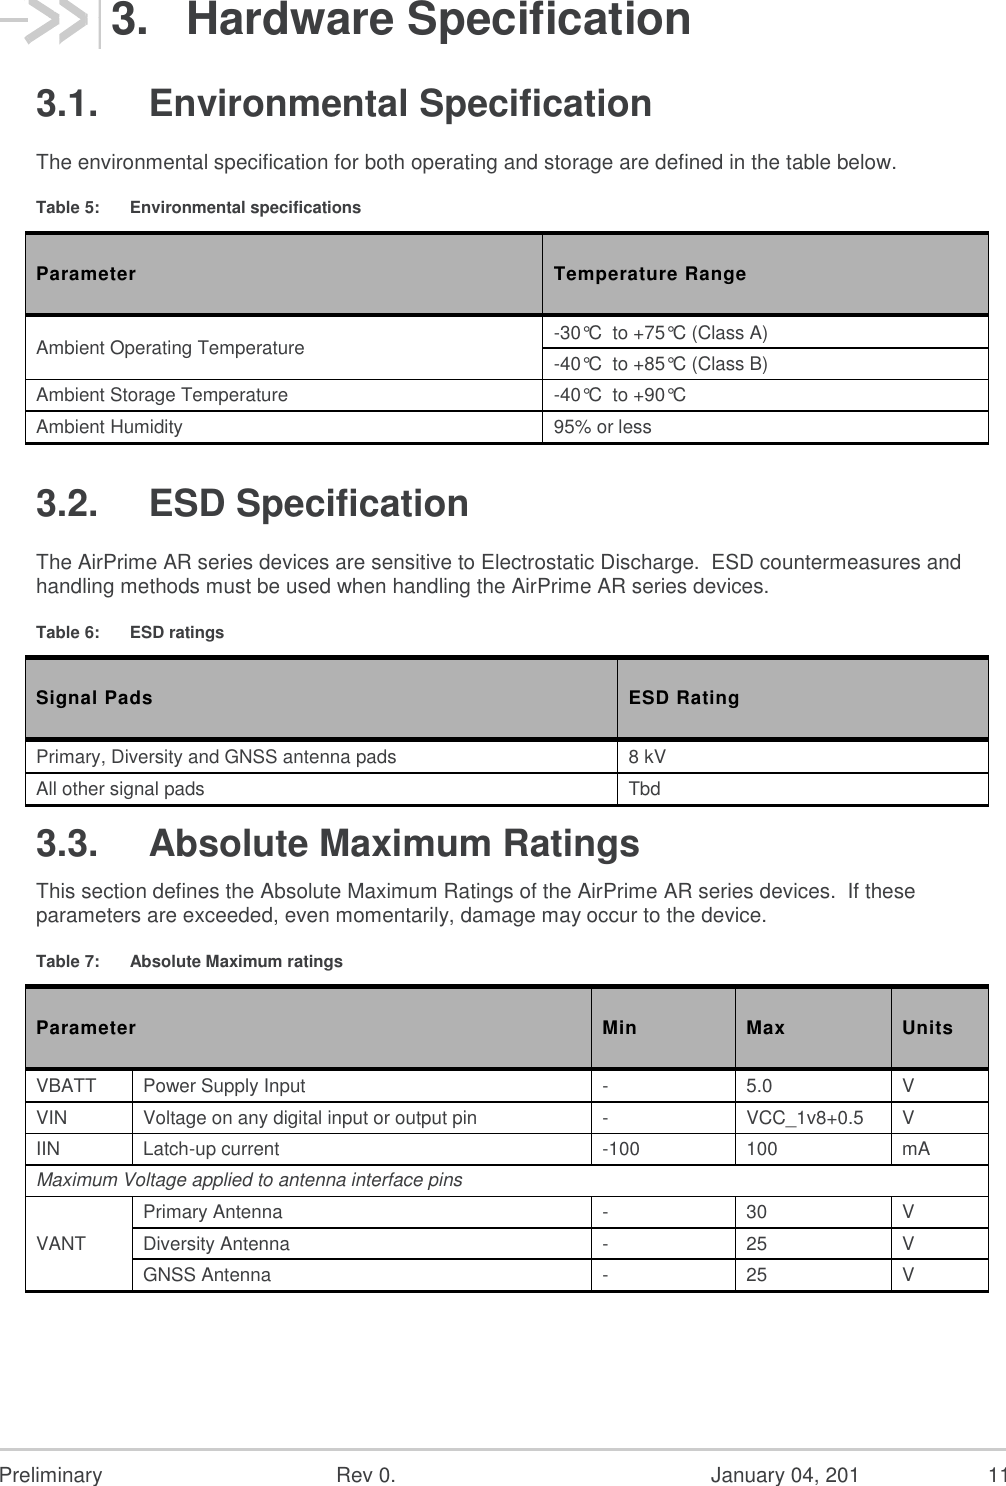  Preliminary  Rev 0.  January 04, 201  11 3.  Hardware Specification 3.1.  Environmental Specification The environmental specification for both operating and storage are defined in the table below. Table 5:  Environmental specifications Parameter Temperature Range Ambient Operating Temperature -30°C  to +75°C (Class A) -40°C  to +85°C (Class B) Ambient Storage Temperature -40°C  to +90°C Ambient Humidity 95% or less 3.2.  ESD Specification The AirPrime AR series devices are sensitive to Electrostatic Discharge.  ESD countermeasures and handling methods must be used when handling the AirPrime AR series devices. Table 6:  ESD ratings Signal Pads ESD Rating Primary, Diversity and GNSS antenna pads 8 kV All other signal pads Tbd 3.3.  Absolute Maximum Ratings This section defines the Absolute Maximum Ratings of the AirPrime AR series devices.  If these parameters are exceeded, even momentarily, damage may occur to the device. Table 7:  Absolute Maximum ratings Parameter Min Max Units VBATT Power Supply Input - 5.0 V VIN Voltage on any digital input or output pin - VCC_1v8+0.5 V IIN Latch-up current -100 100 mA Maximum Voltage applied to antenna interface pins VANT Primary Antenna - 30 V Diversity Antenna - 25 V GNSS Antenna - 25 V 